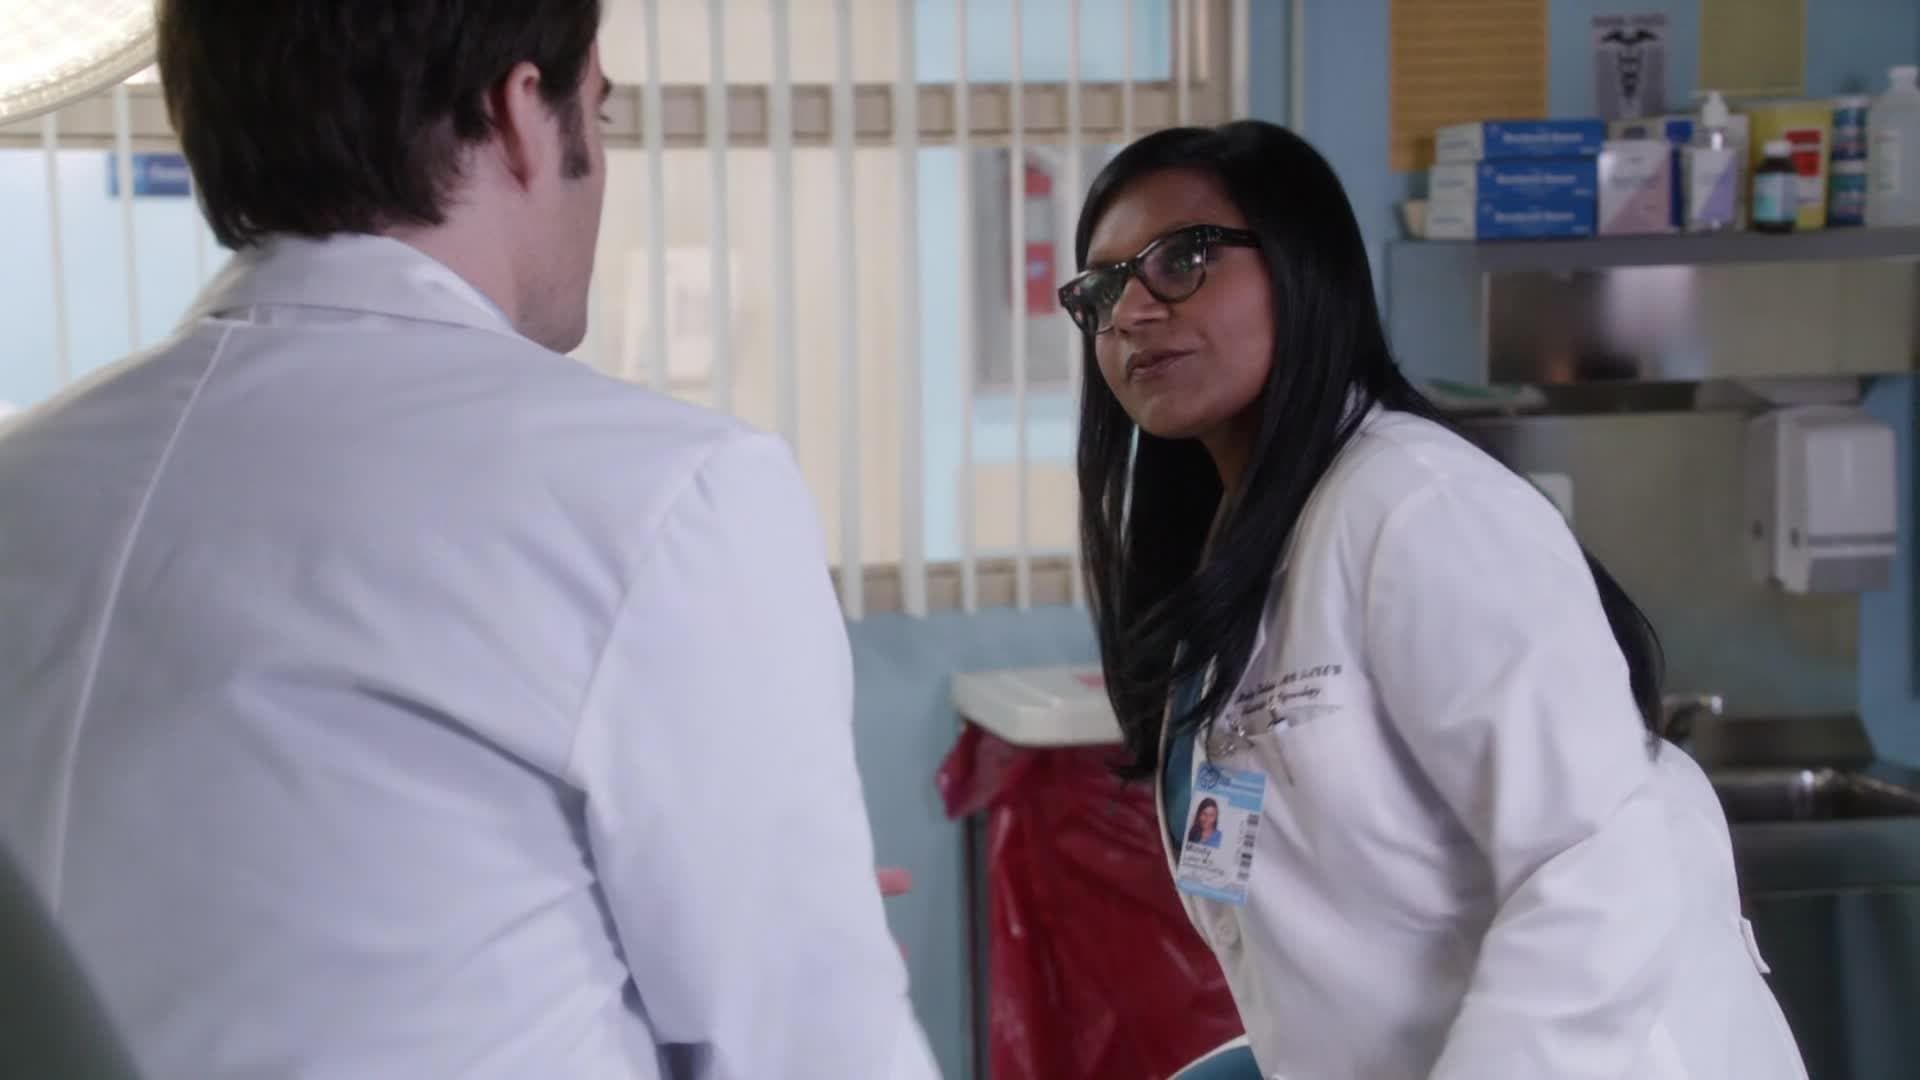 The Mindy Project background